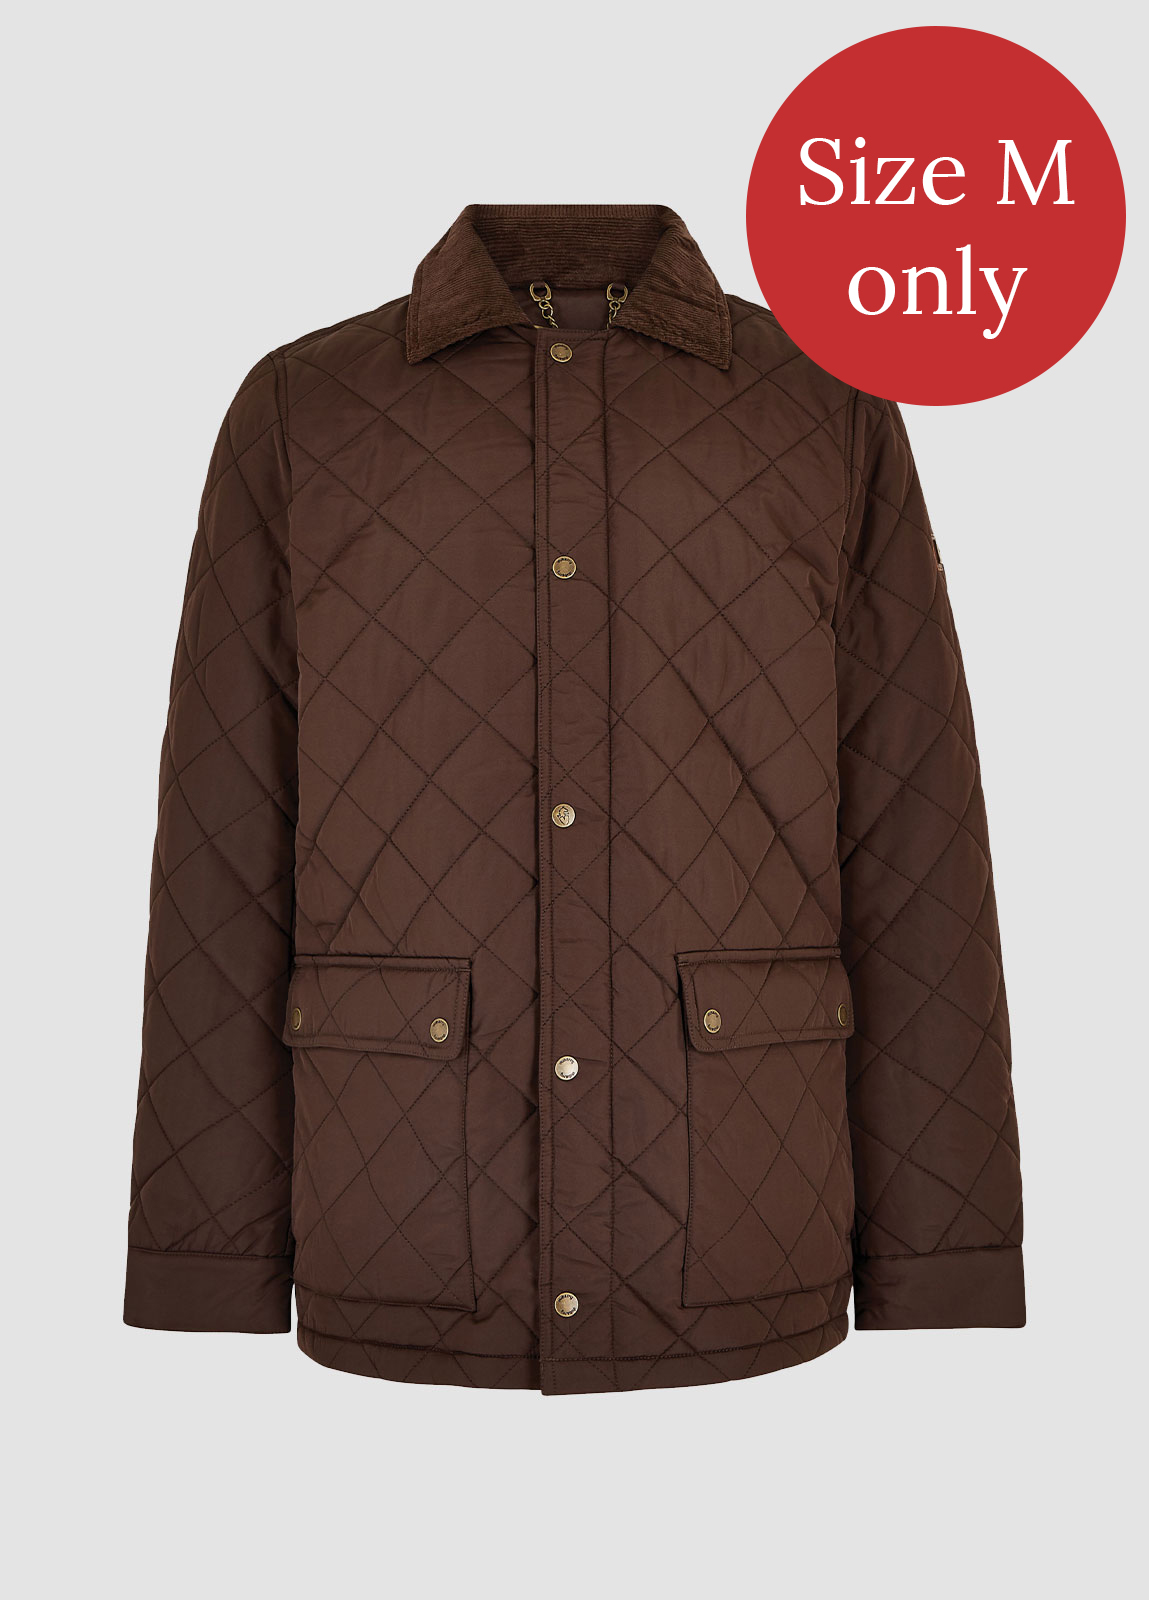 Adare Quilted Jacket - Peat